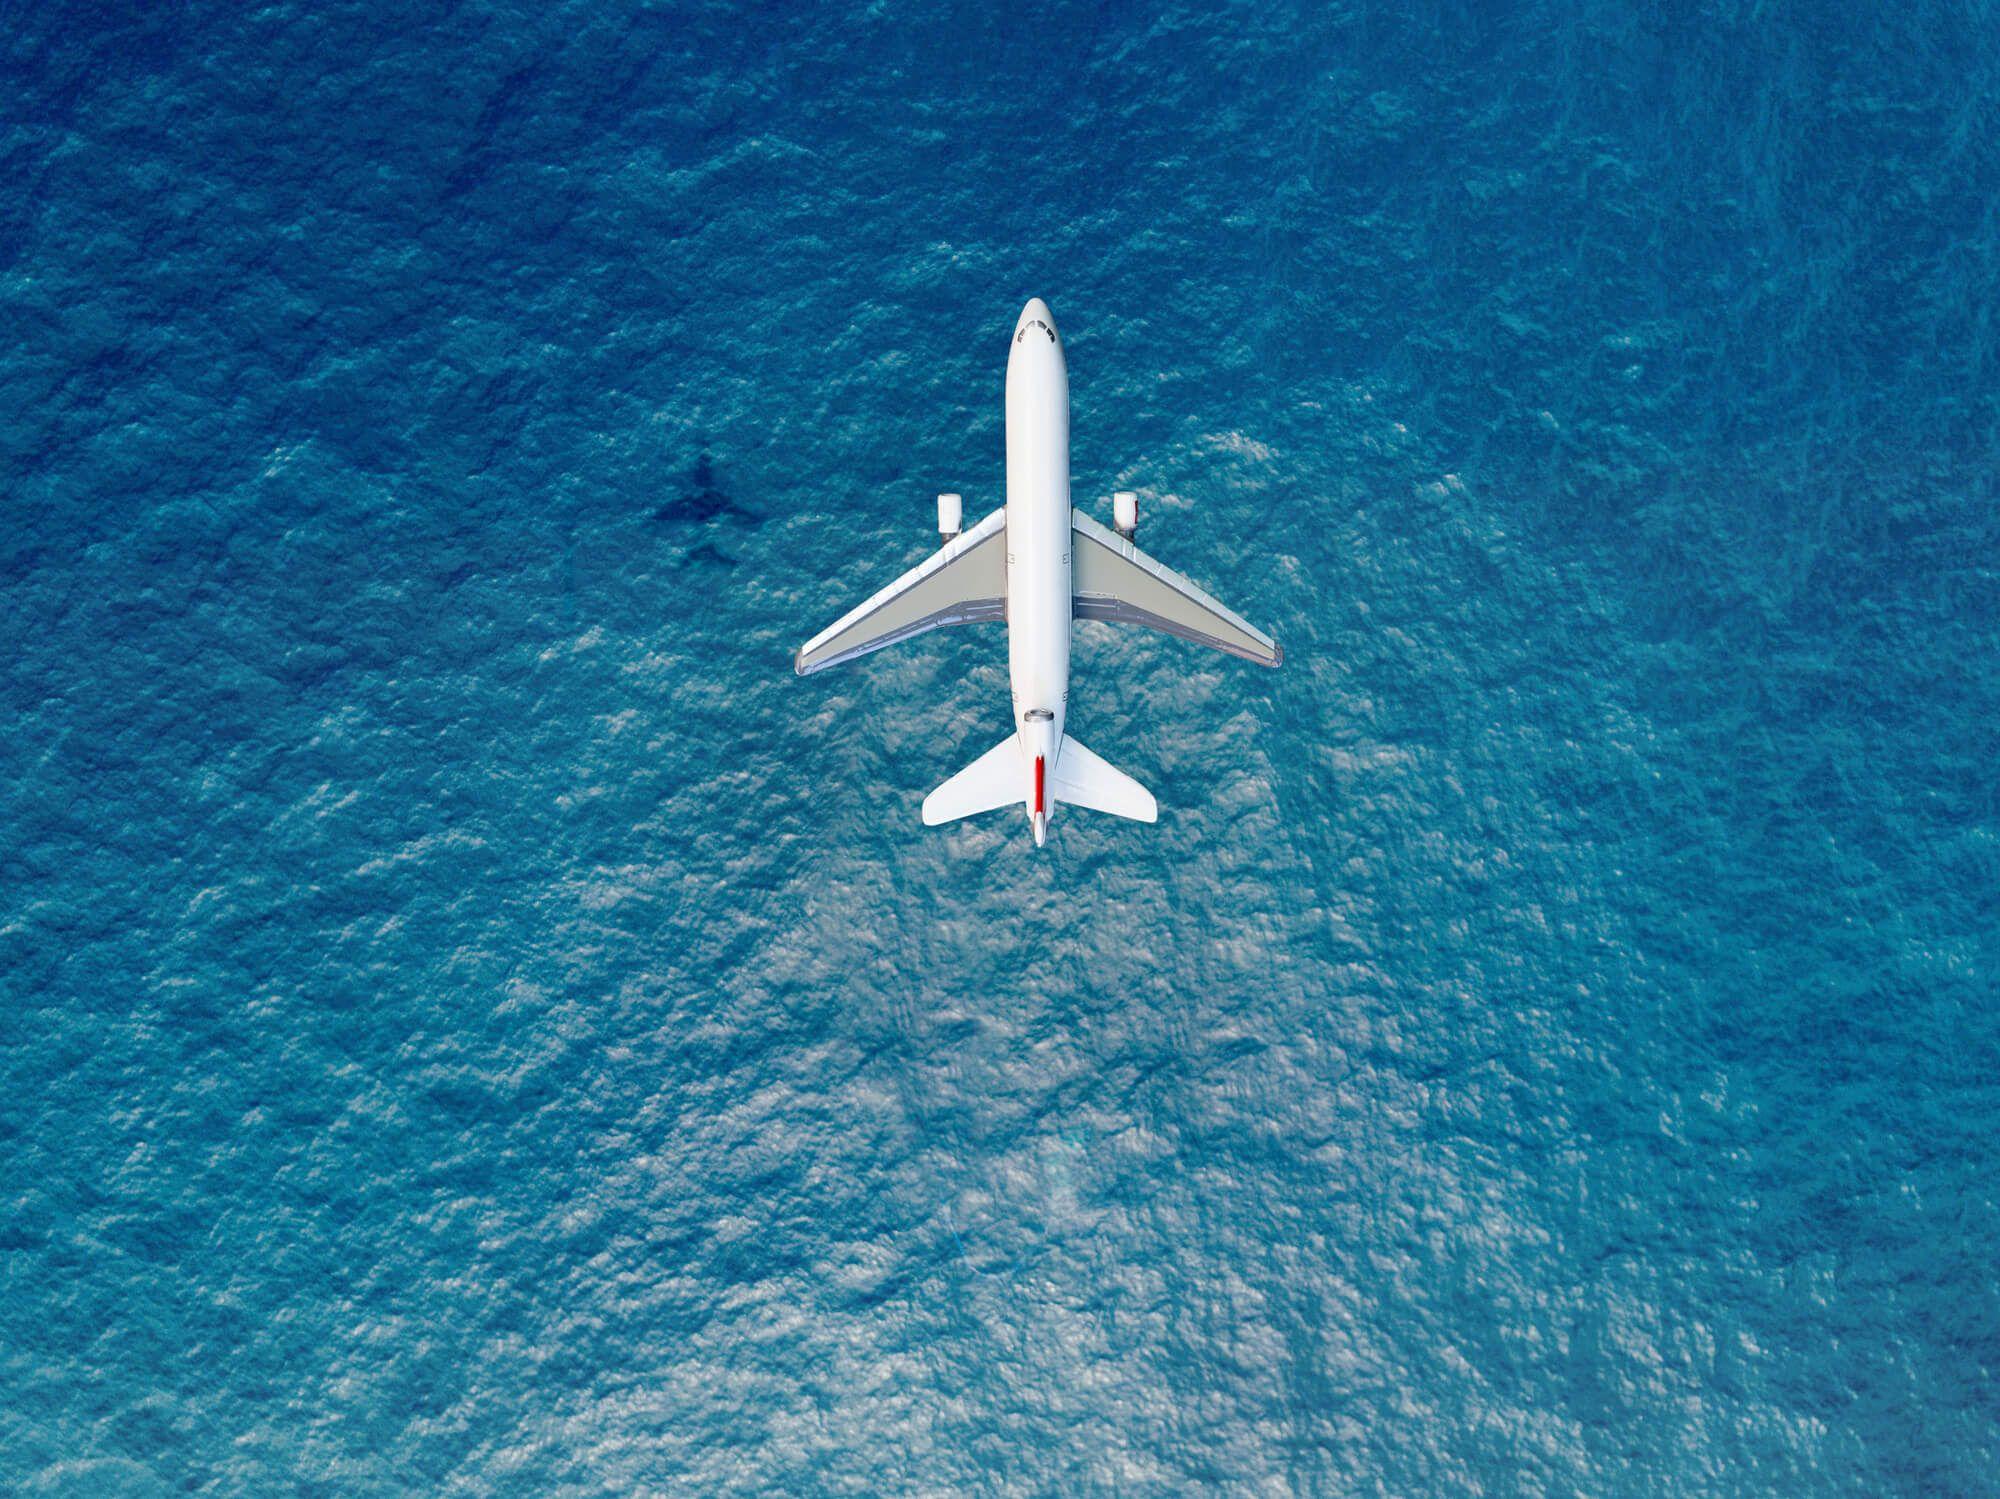 Birds-view of an airplane above the sea